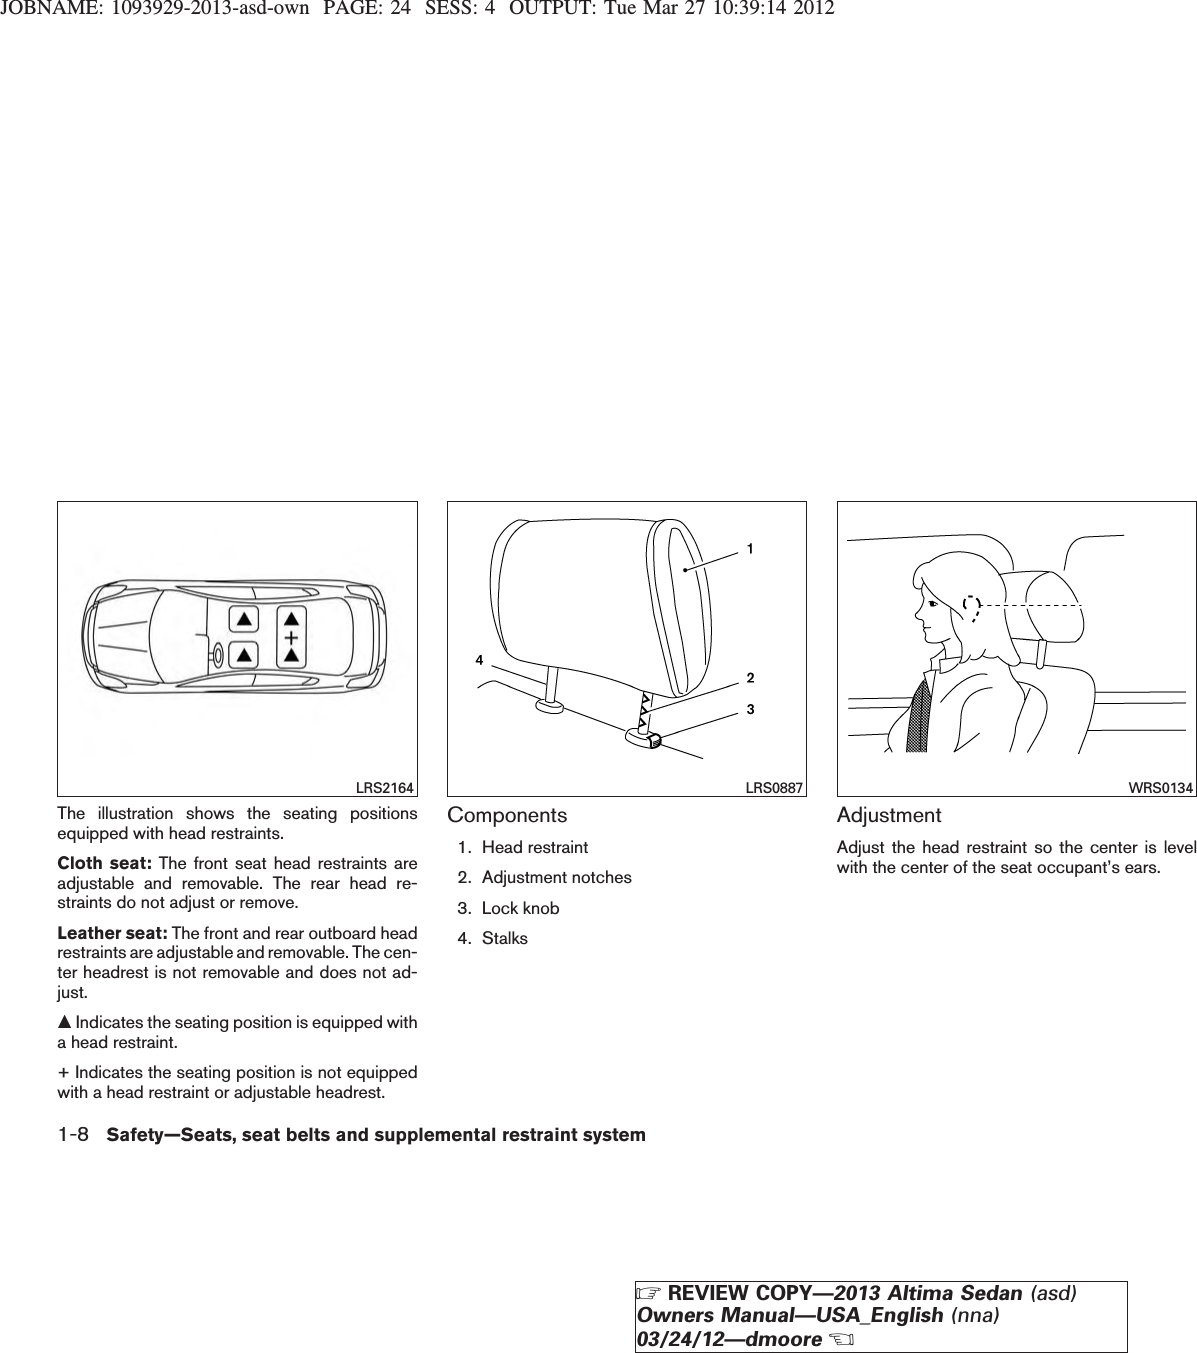 JOBNAME: 1093929-2013-asd-own PAGE: 24 SESS: 4 OUTPUT: Tue Mar 27 10:39:14 2012The illustration shows the seating positionsequipped with head restraints.Cloth seat: The front seat head restraints areadjustable and removable. The rear head re-straints do not adjust or remove.Leather seat: The front and rear outboard headrestraints are adjustable and removable. The cen-ter headrest is not removable and does not ad-just.mIndicates the seating position is equipped witha head restraint.+ Indicates the seating position is not equippedwith a head restraint or adjustable headrest.Components1. Head restraint2. Adjustment notches3. Lock knob4. StalksAdjustmentAdjust the head restraint so the center is levelwith the center of the seat occupant’s ears.LRS2164 LRS0887 WRS01341-8 Safety—Seats, seat belts and supplemental restraint systemZREVIEW COPY—2013 Altima Sedan (asd)Owners Manual—USA_English (nna)03/24/12—dmooreX